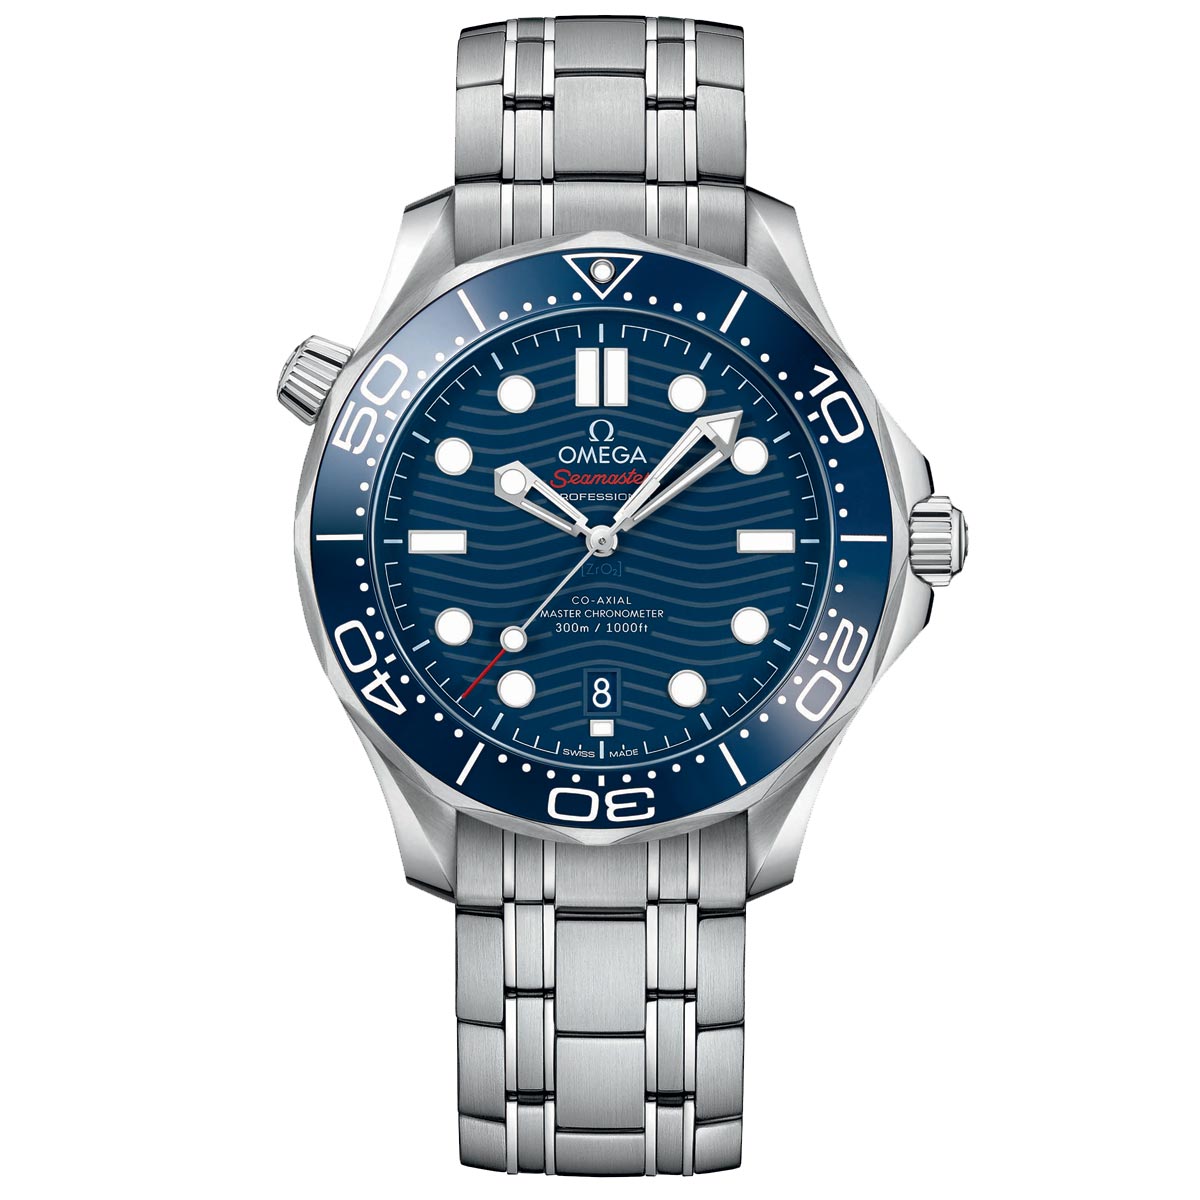 OMEGA Seamaster Diver 300M Co-Axial Master Chronometer 42mm Watch